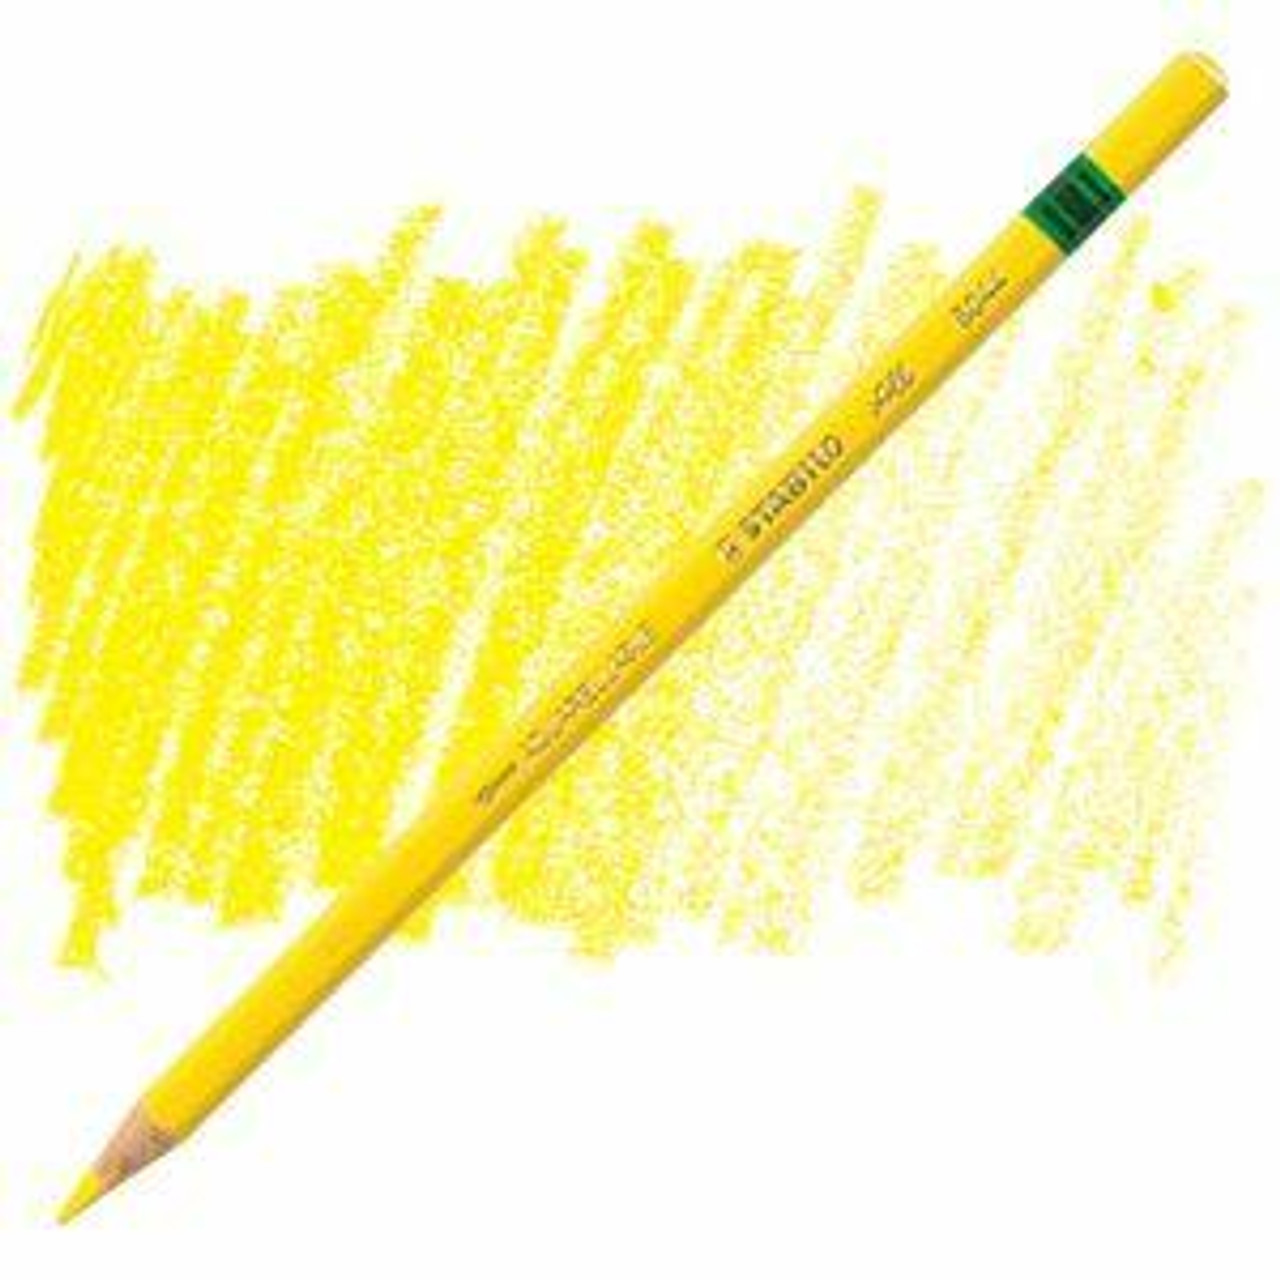 https://cdn11.bigcommerce.com/s-9uf88xhege/images/stencil/1280x1280/products/9637/35810/stabilo-stabilo-all-stabilo-colored-pencil-for-film-and-glass-yellow__45971.1688153628.jpg?c=1